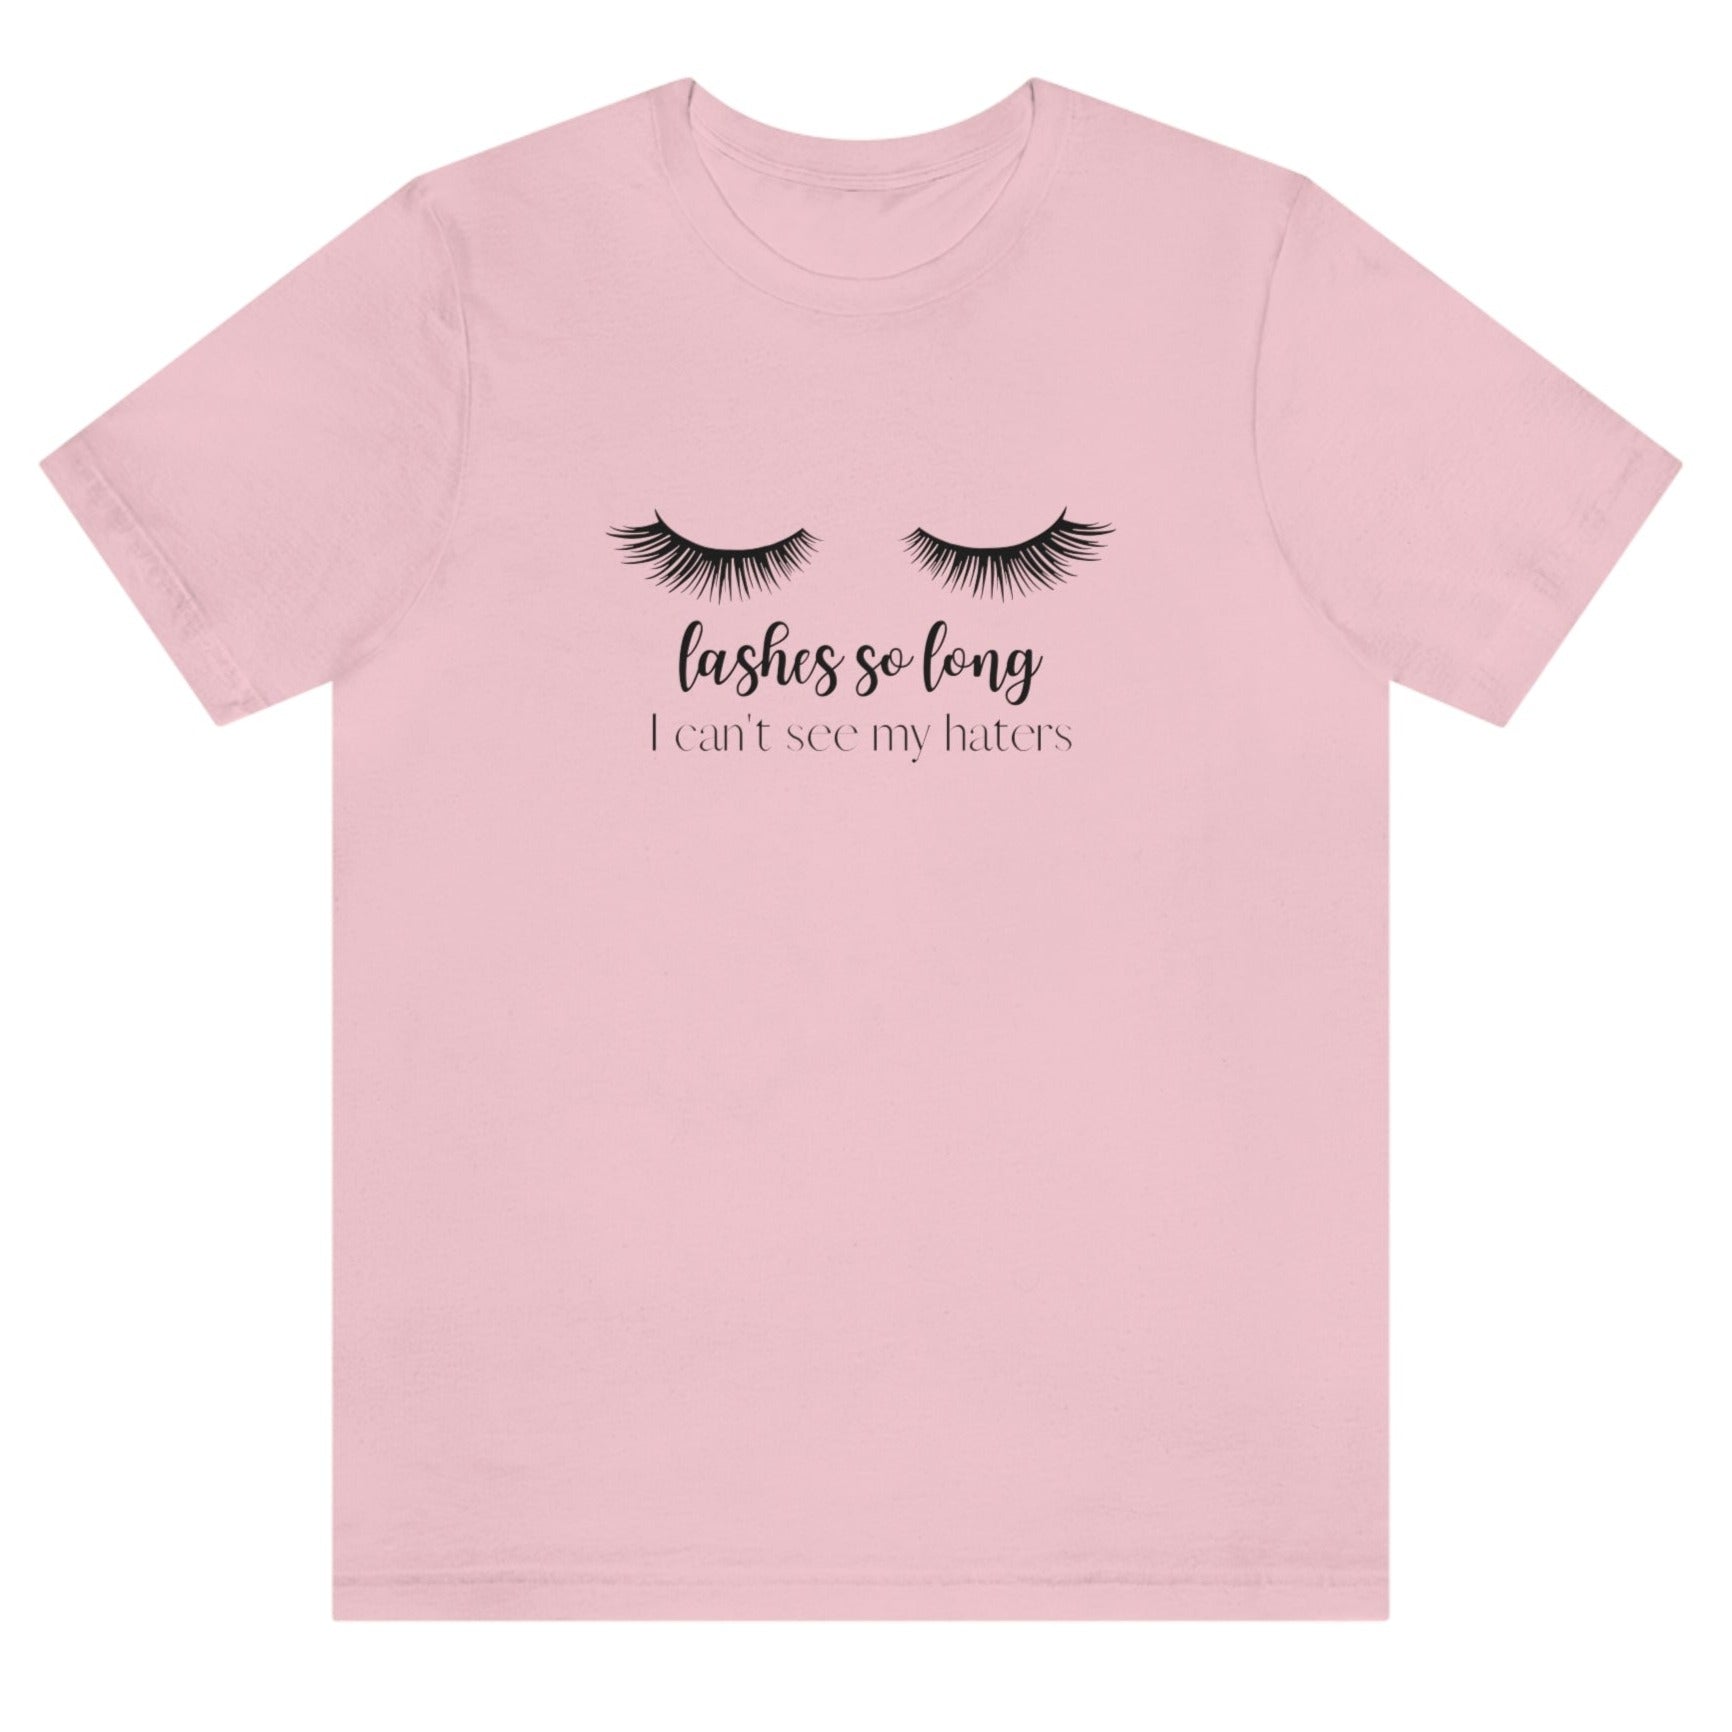 lashes-so-long-i-cant-see-my-haters-pink-t-shirt-womens